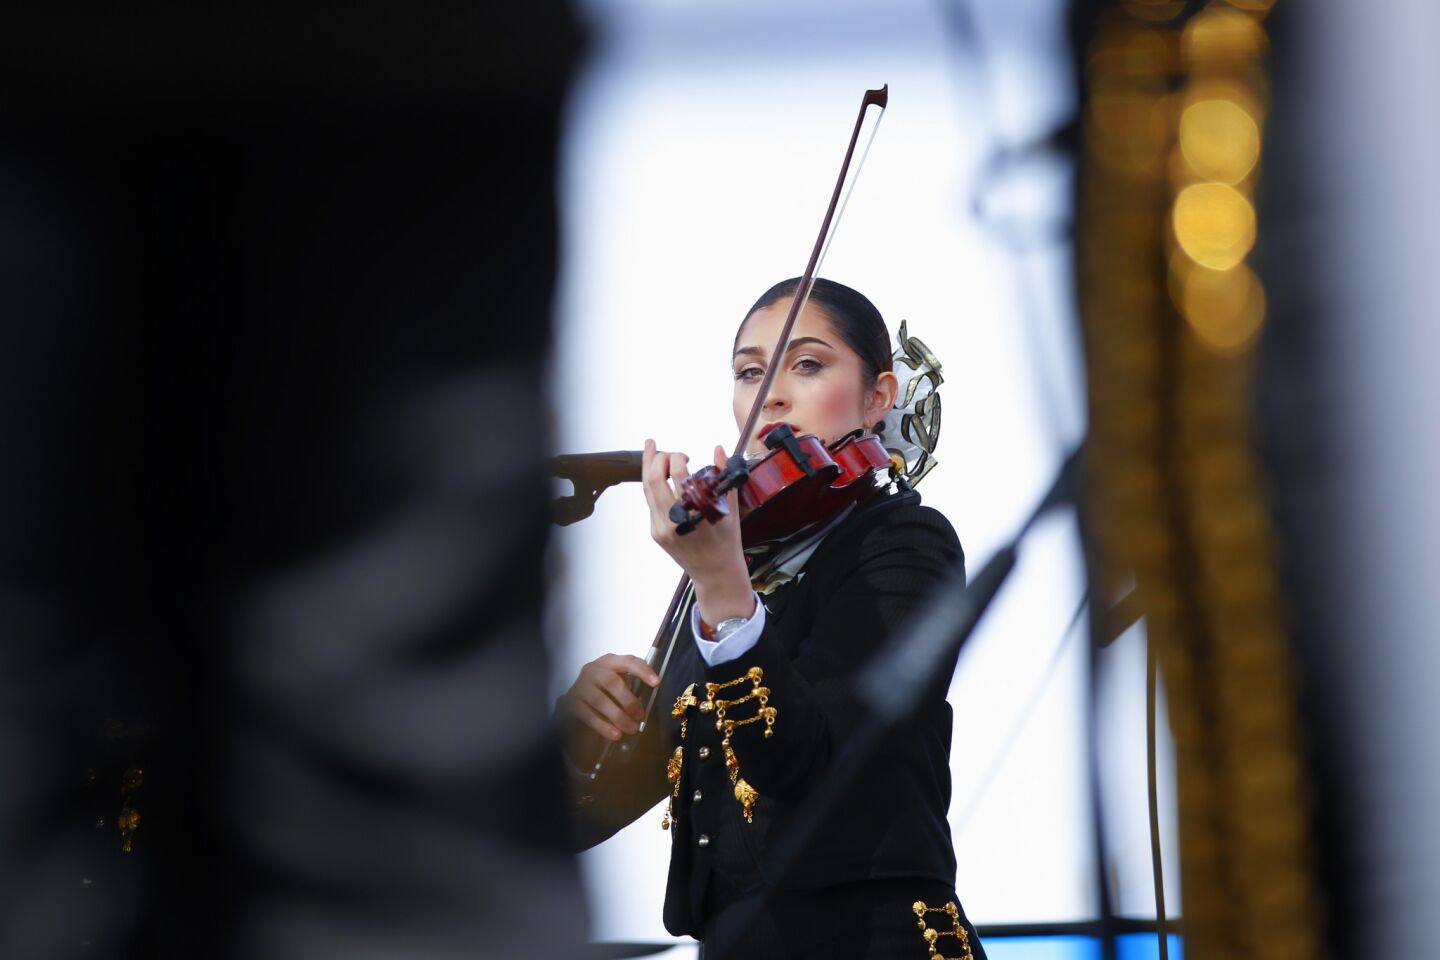 One of the violinist from the Mariachi Estrellas de Chula Vista plays during a solo performance. She and the group were performing on Sunday at the annual International Mariachi Festival in National City.